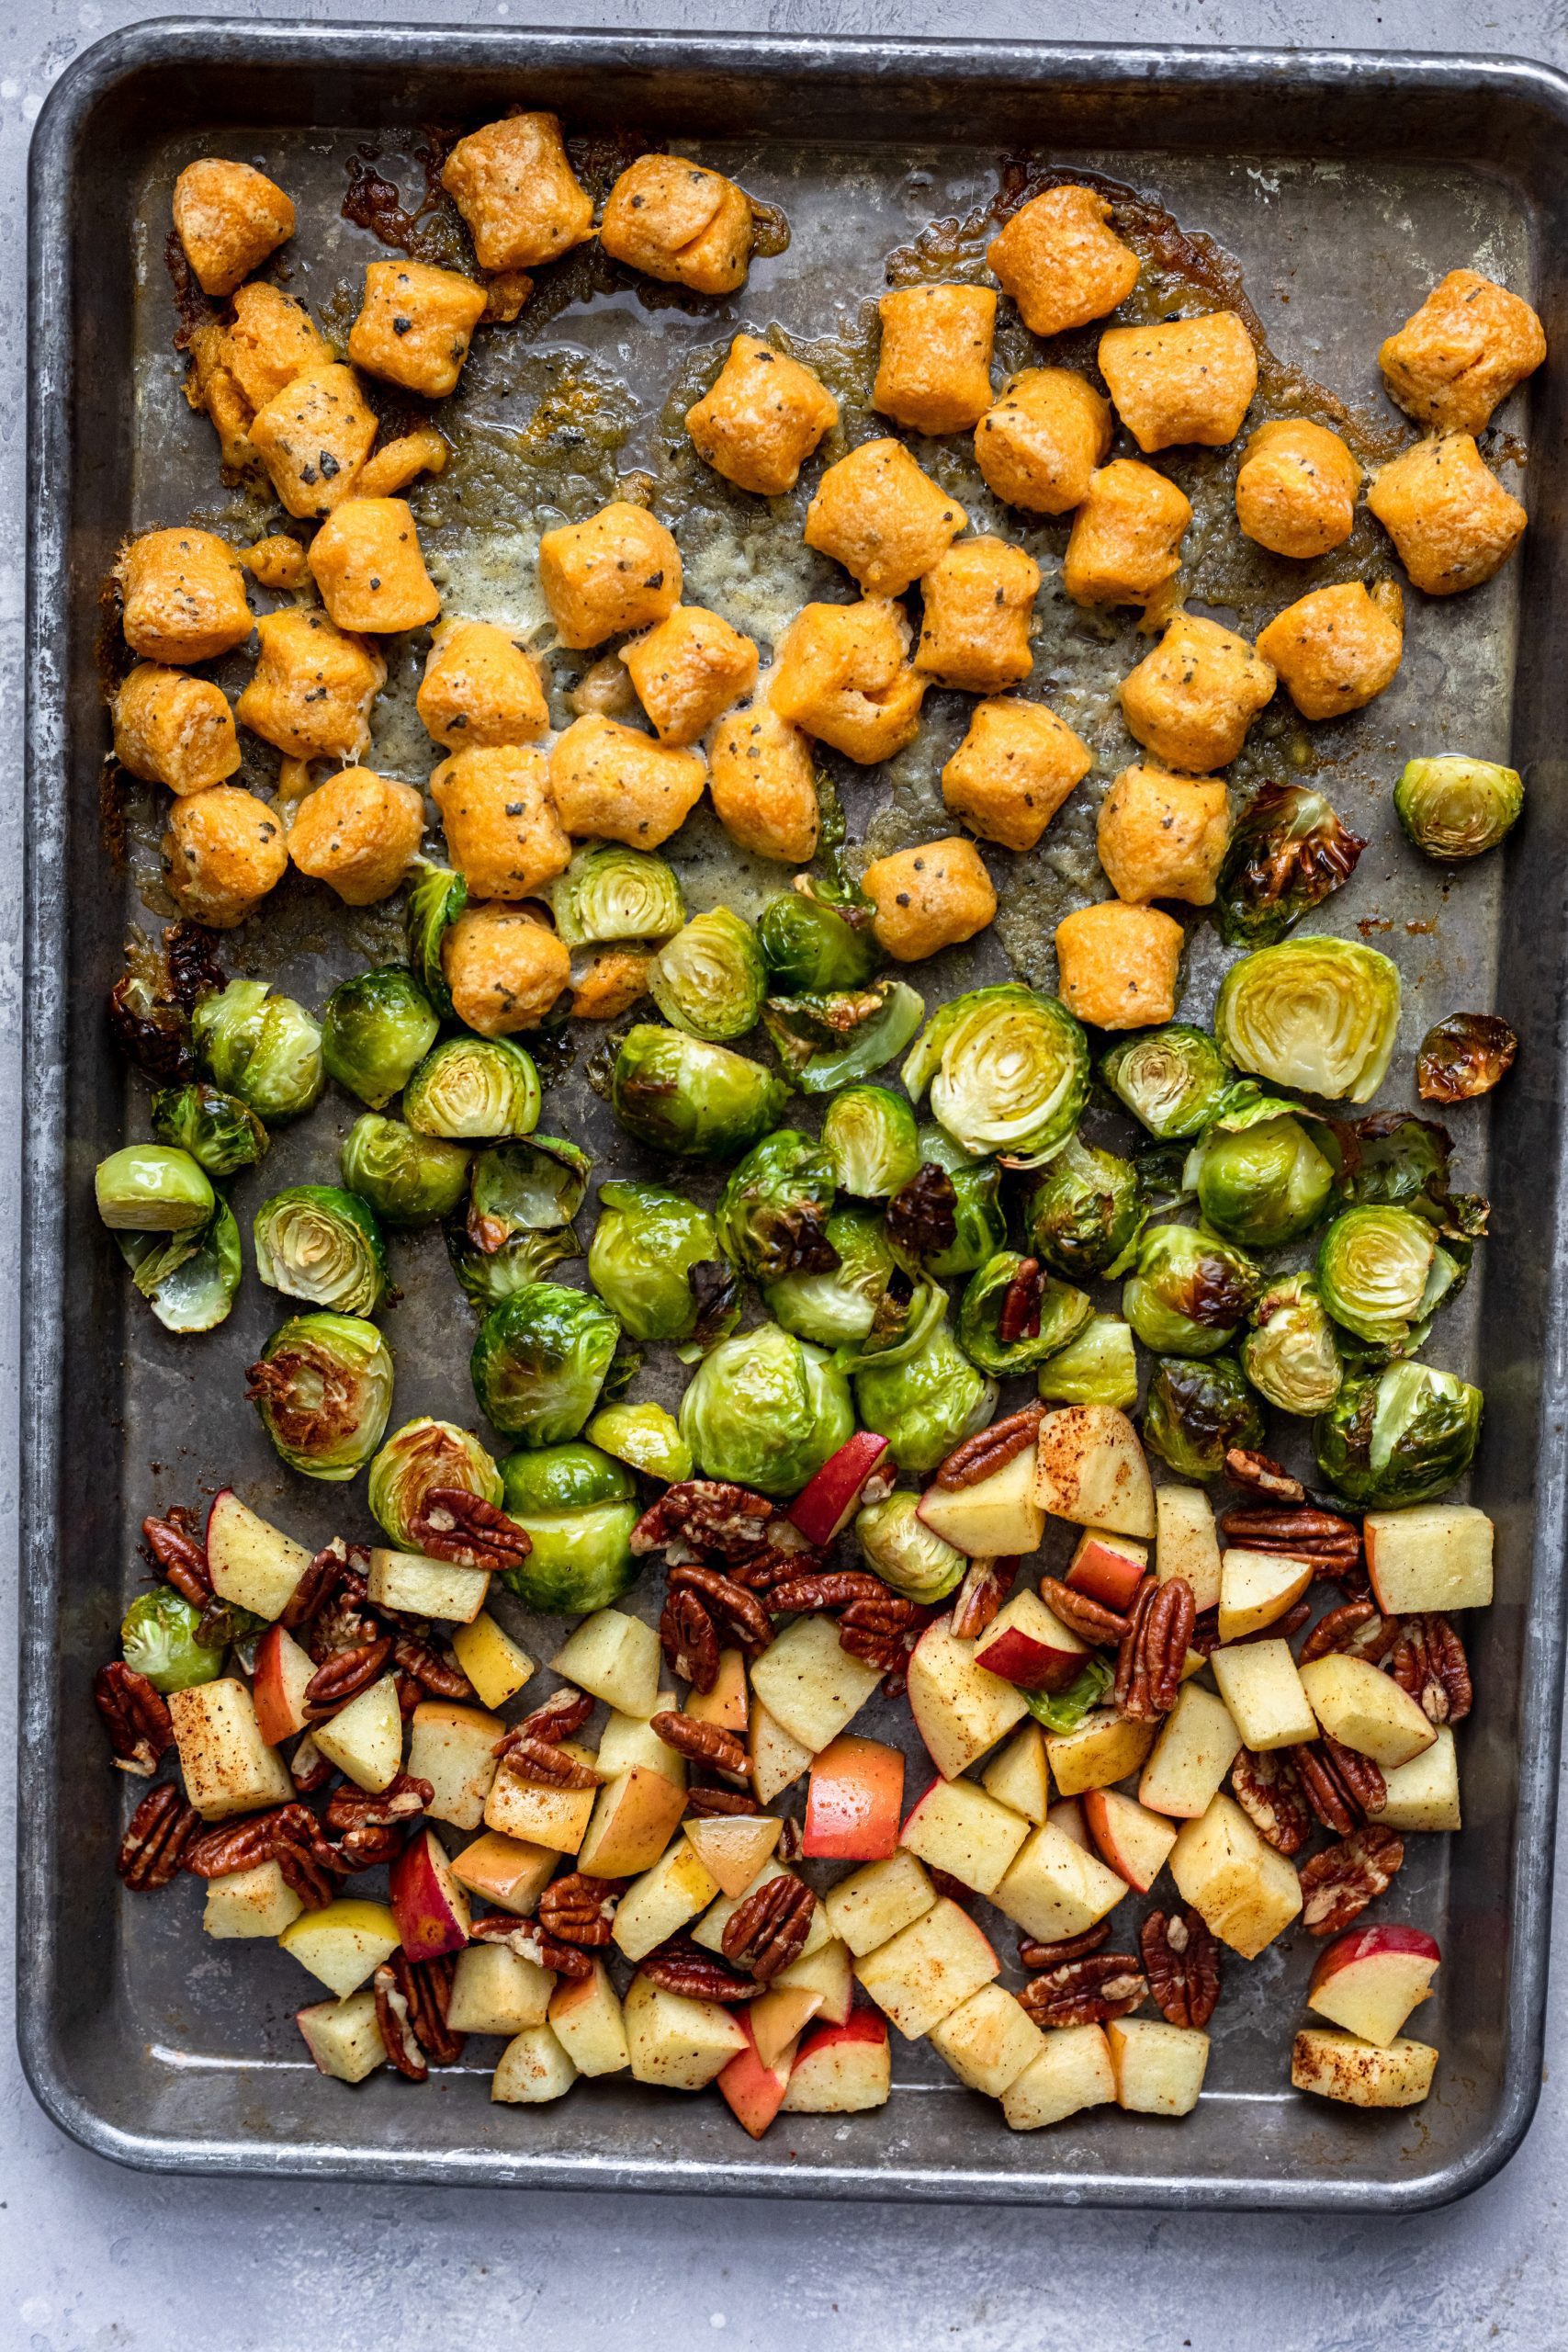 Trader Joe's Sweet Potato Gnocchi Sheet Pan Meal With Apples And Brussels Sprouts